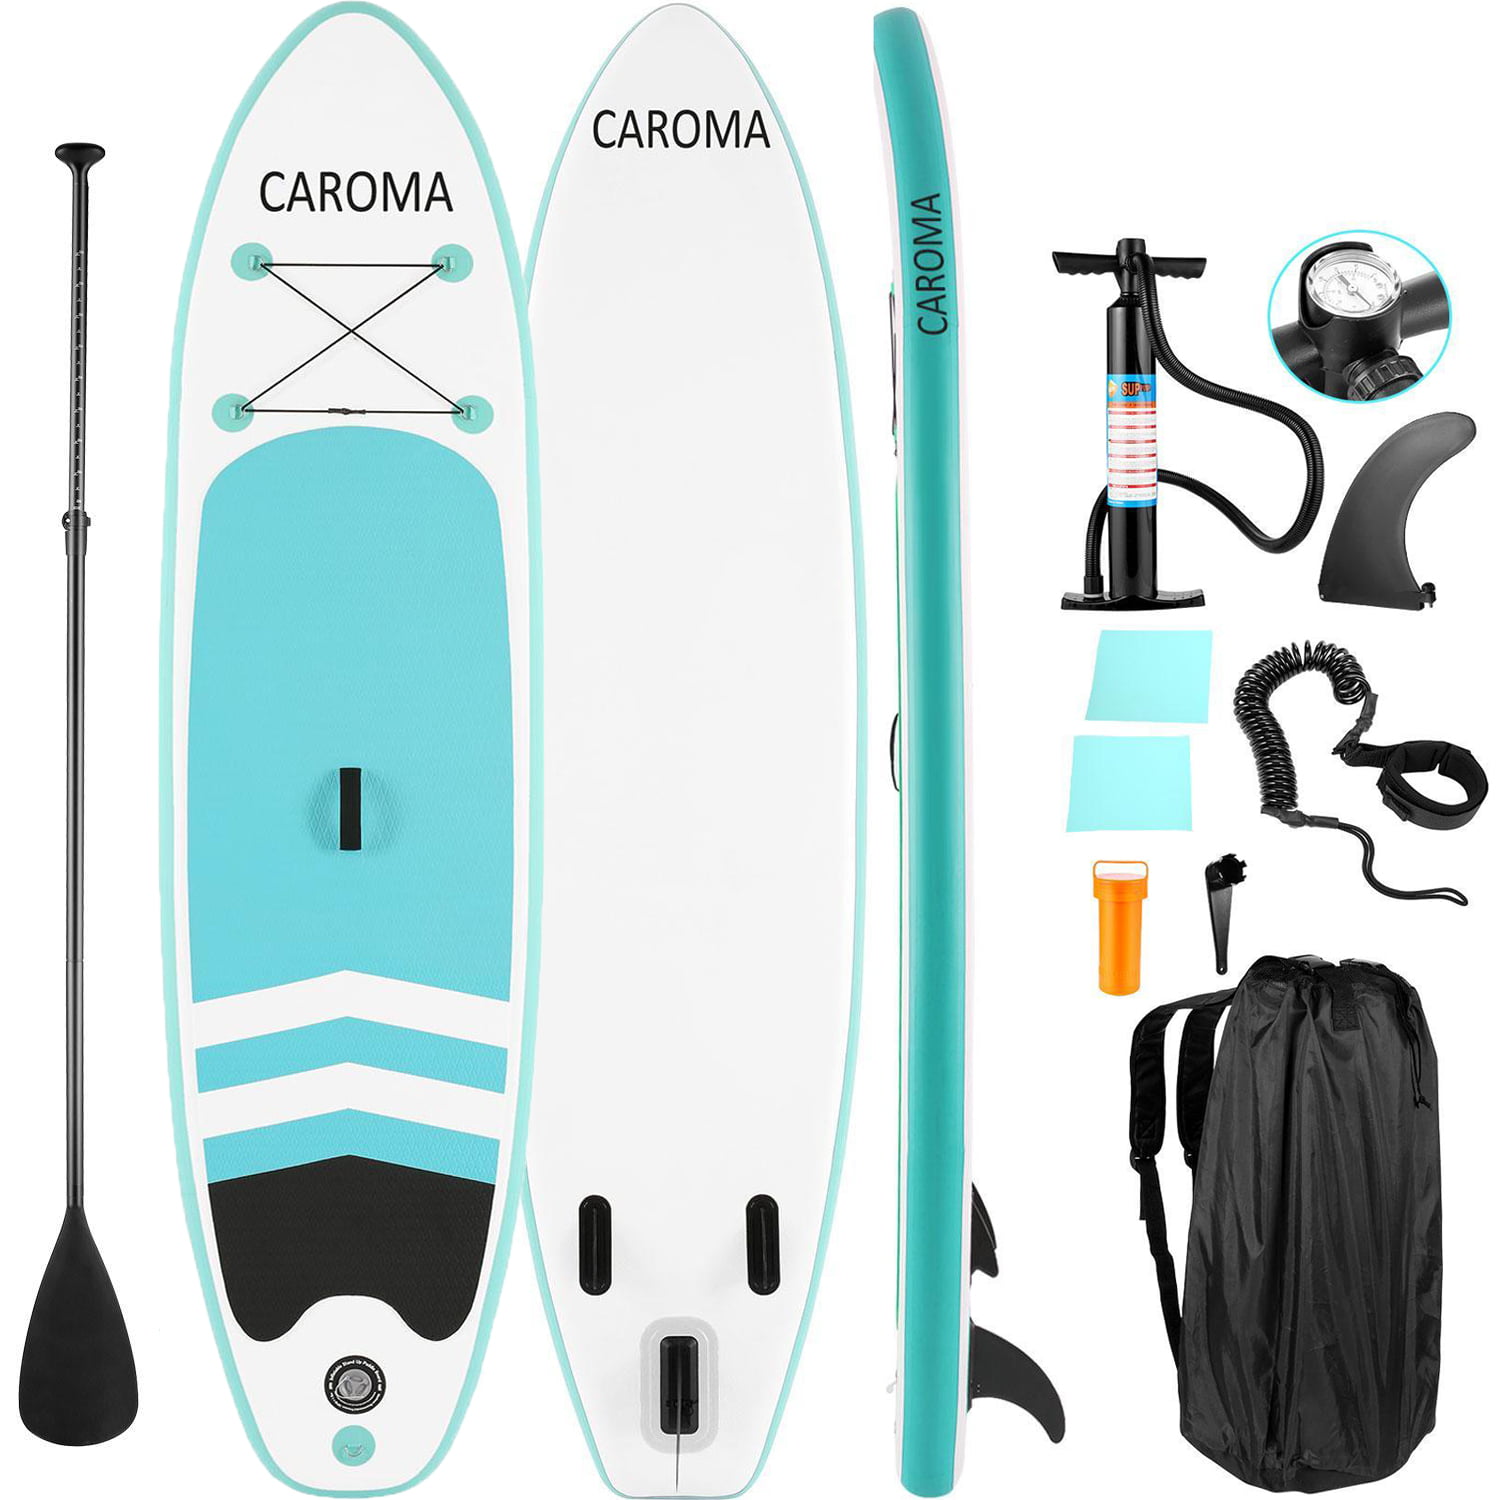 CAROMA 10FT Inflatable Paddle Board SUP Stand Up Paddleboard Surfing ...